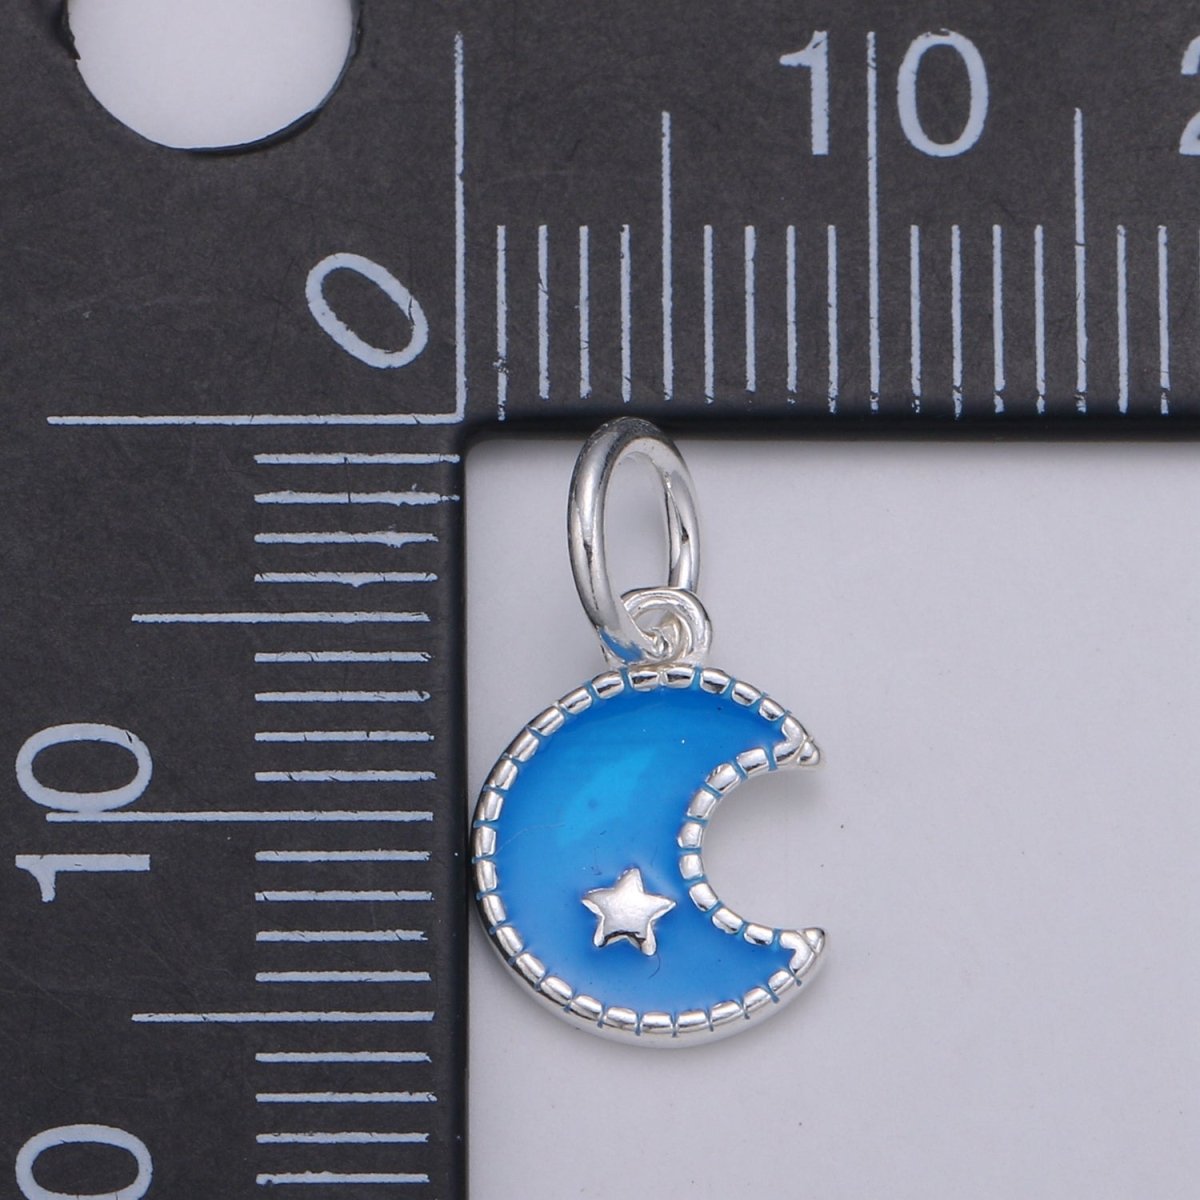 8.5mm Sterling Silver Moon Charm - 925 Silver Crescent Moon Charm - Silver Celestial Charm - Moon Pendant - Silver Star charm Necklace SL-021 SL-022 - DLUXCA